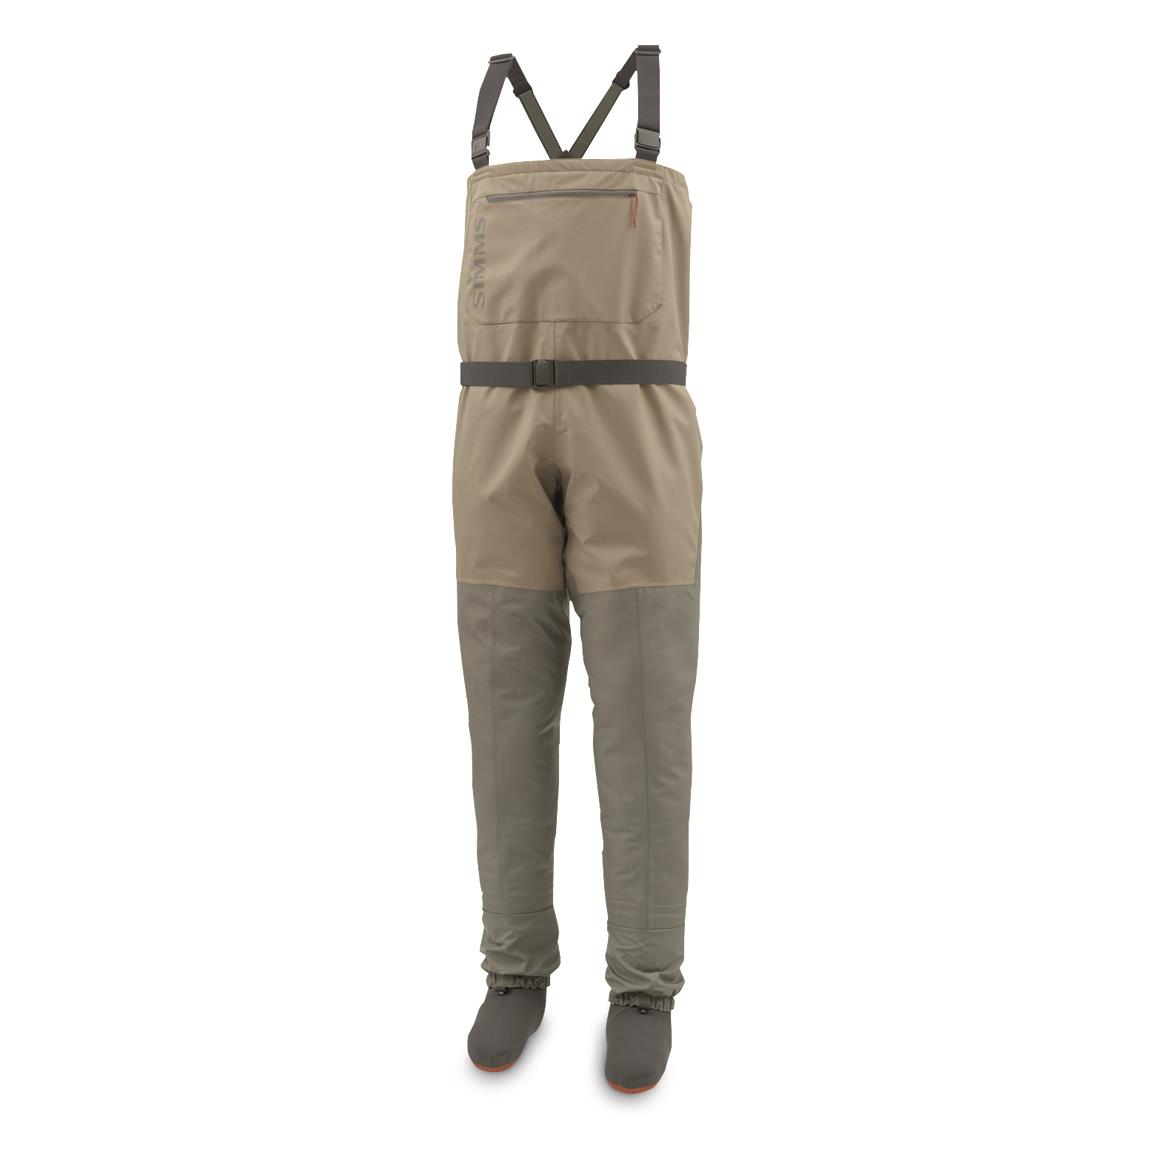 Simms Tributary Breathable Stockingfoot Chest Waders, Tan